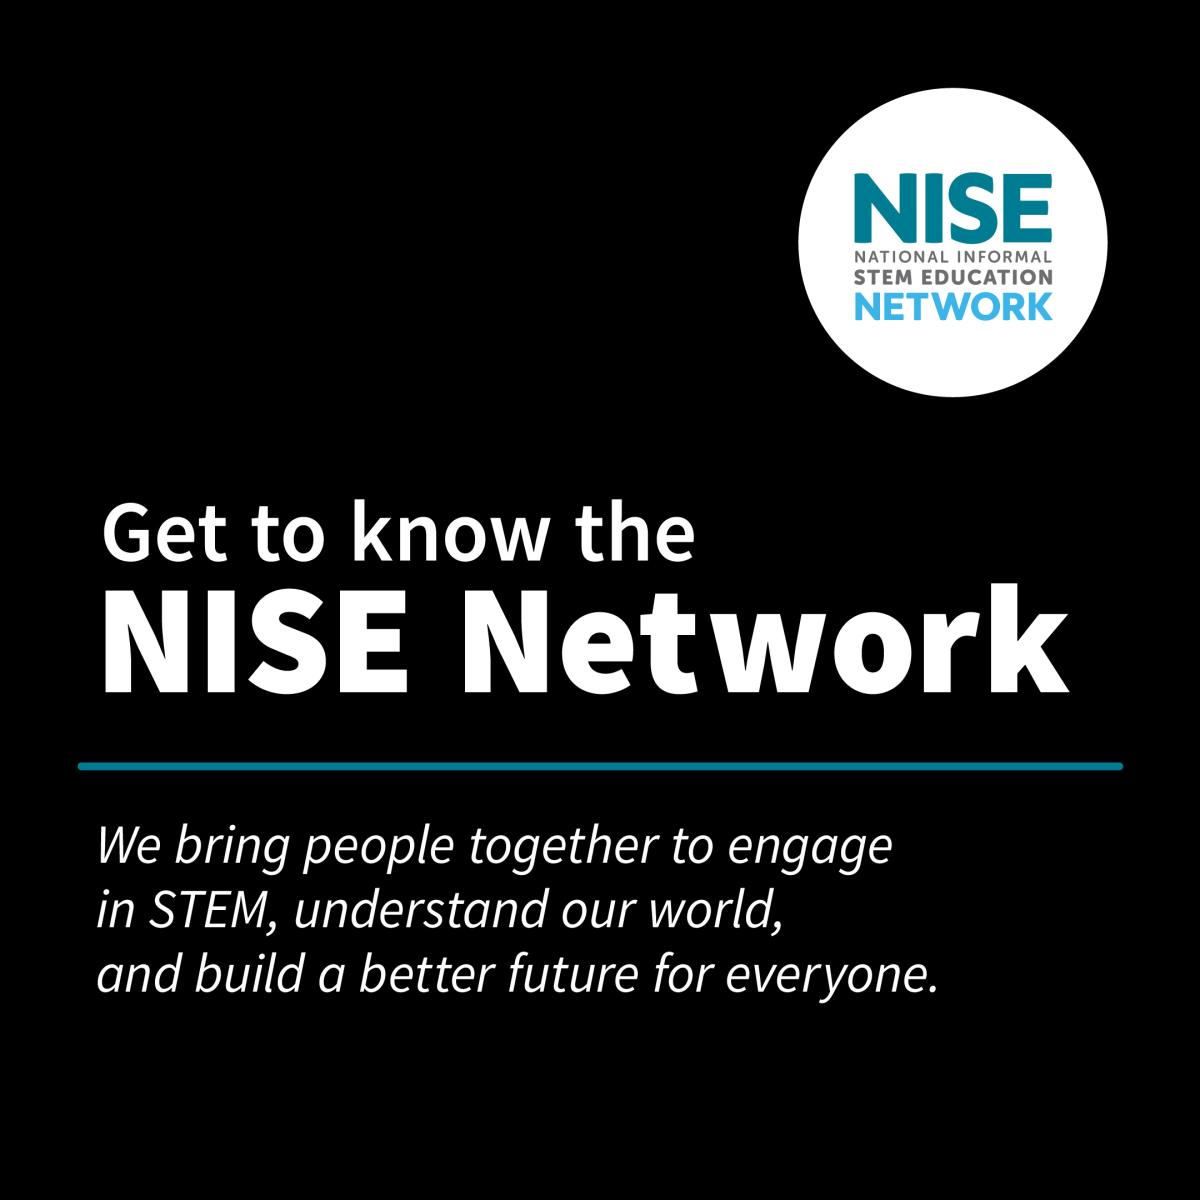 Get to know the NISE Network overview video